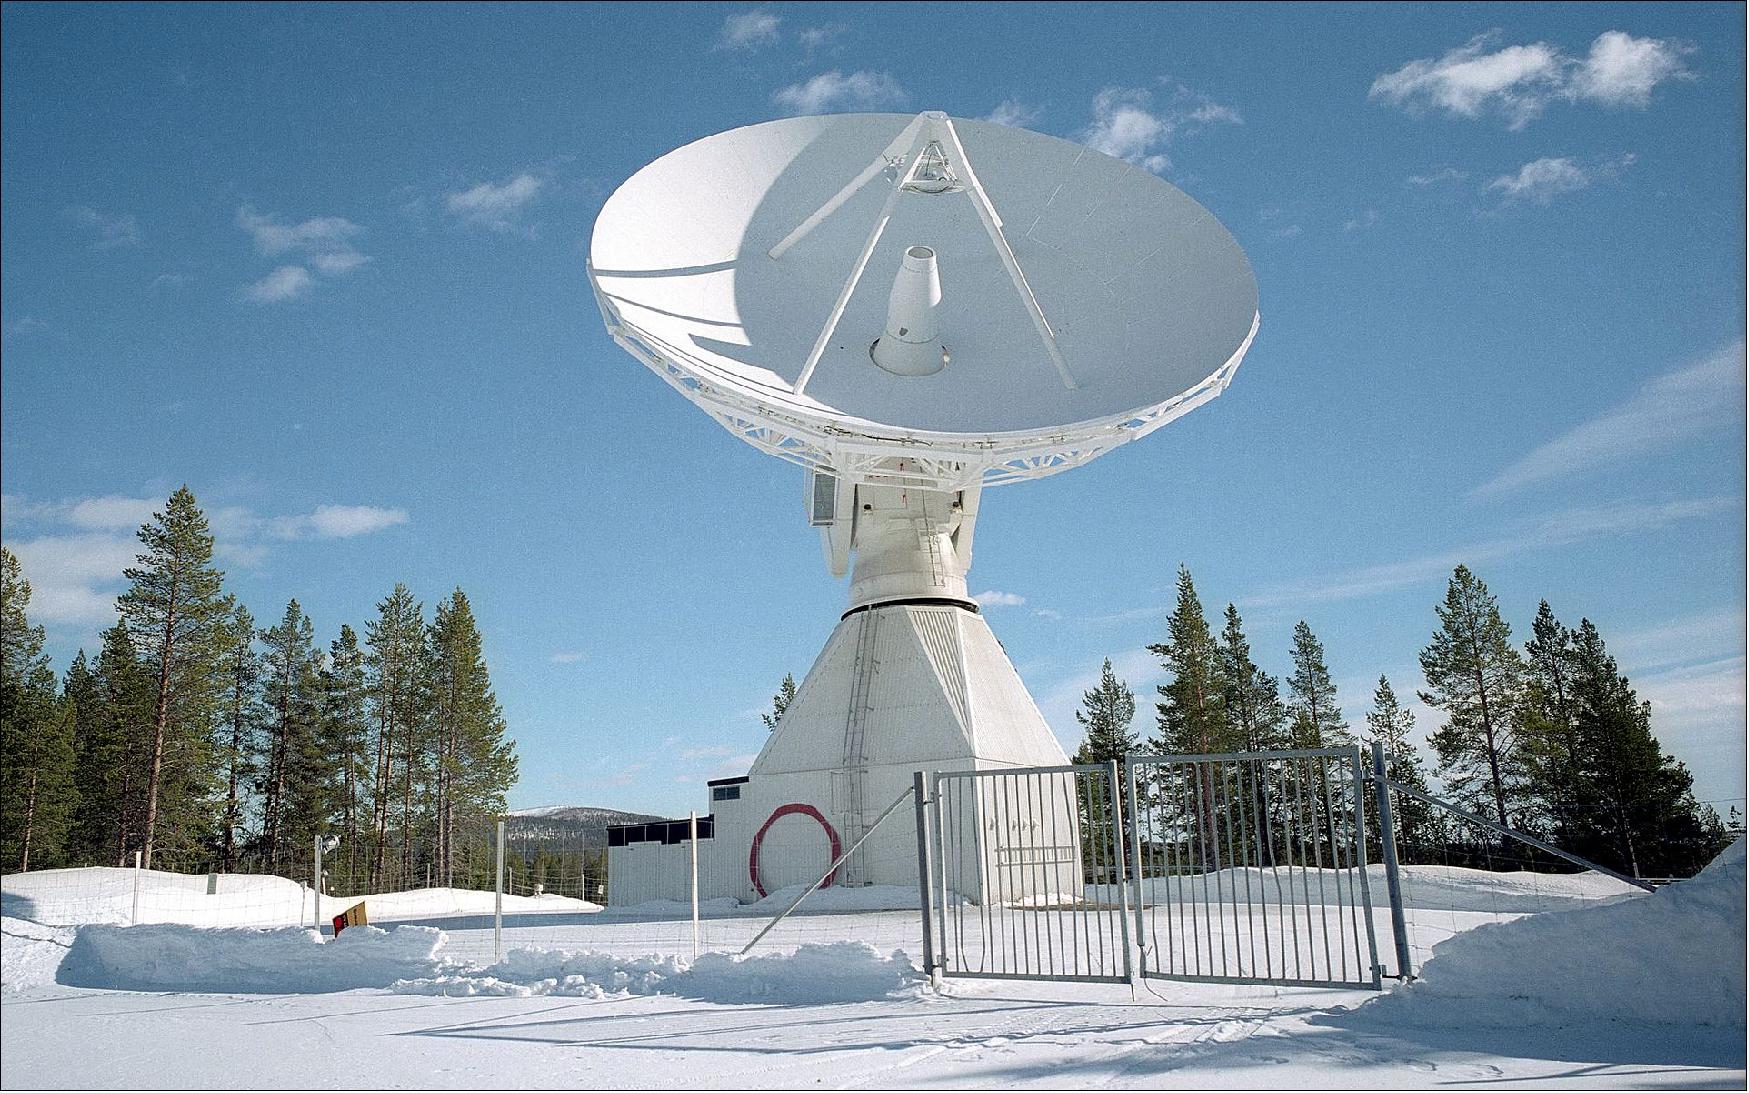 Figure 57: The Kiruna S- and X-band station supports ESA's Earth observation missions. The station is located at Salmijärvi, 38 km east of Kiruna, in northern Sweden. The station is equipped for tracking, telemetry and command operations as well as for reception, recording, processing and dissemination of data (image credit: ESA, S. Corvaja)